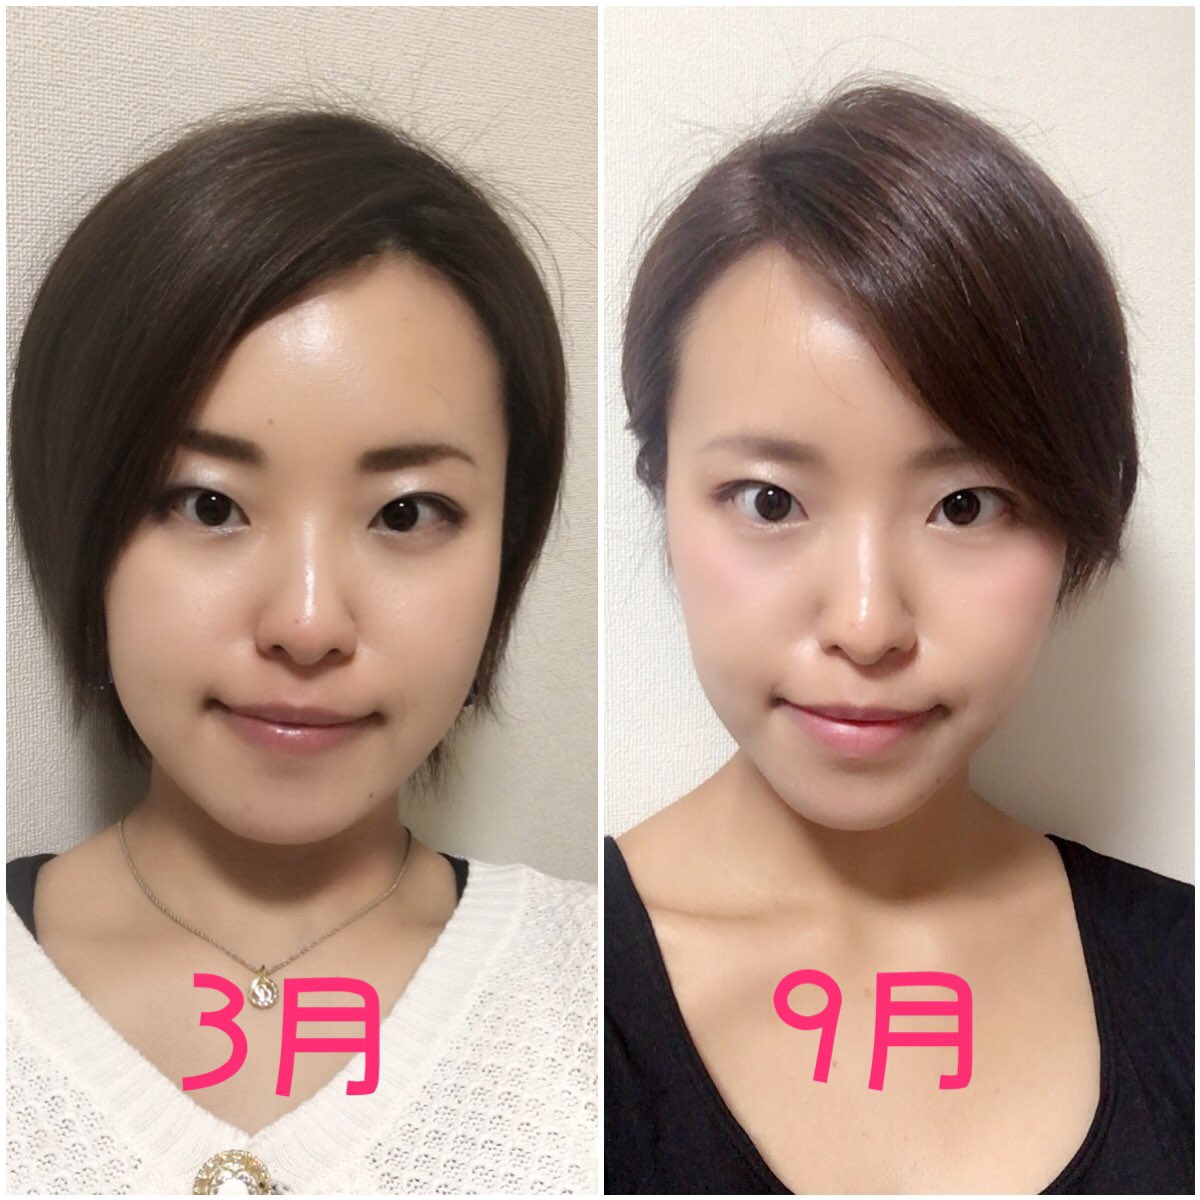 Diet Before After News ダイエット成功者一覧 顔 お腹 脚 美脚に ダイエット成功ビフォーアフター画像 ダイエット成功者一覧 ダイエット ビフォーアフター Reina 0007 T Co Pu1brvjazz